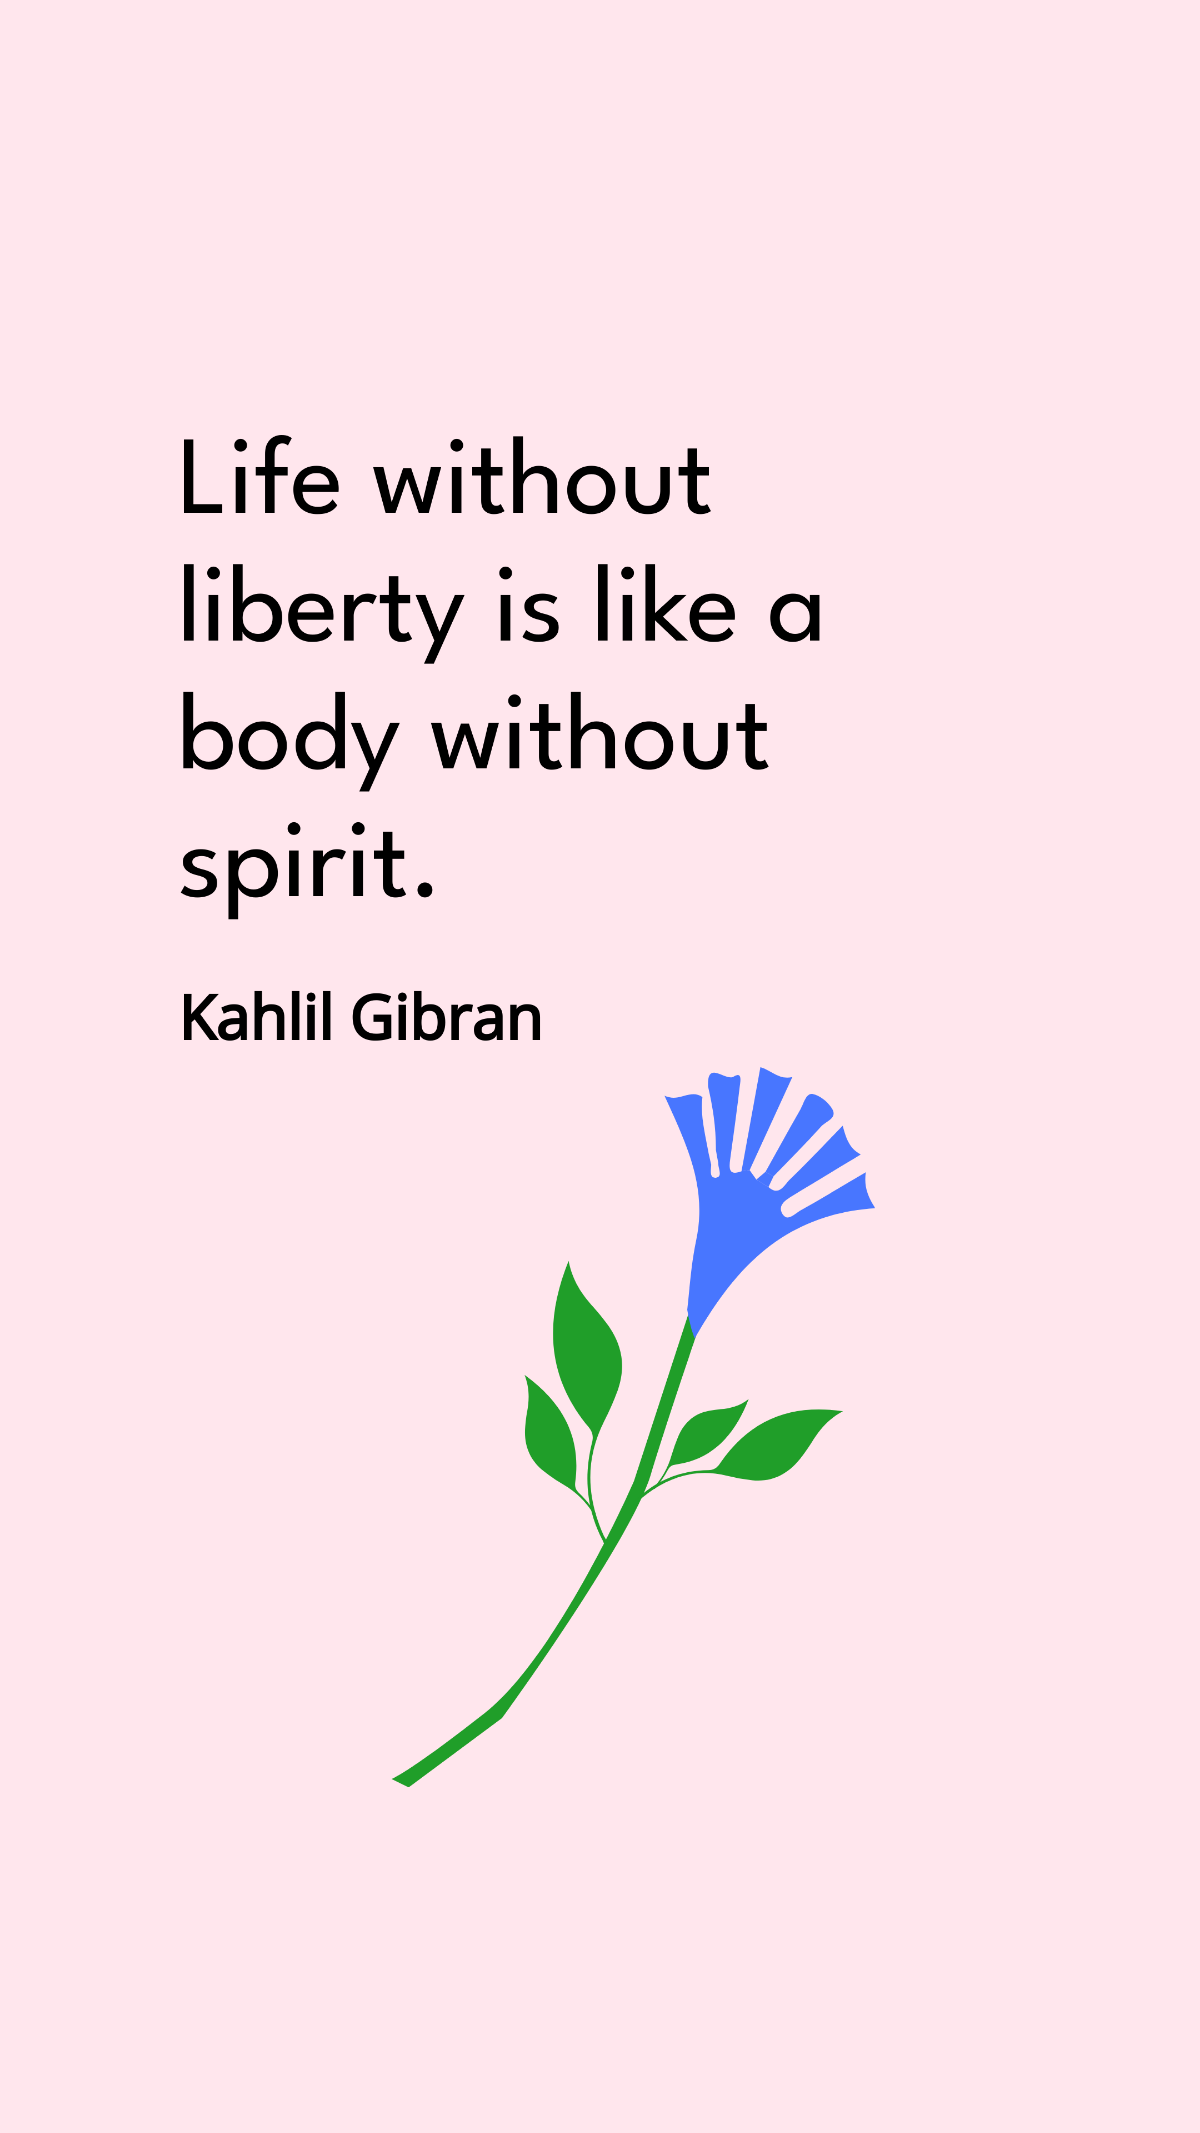 Kahlil Gibran - Life without liberty is like a body without spirit. Template